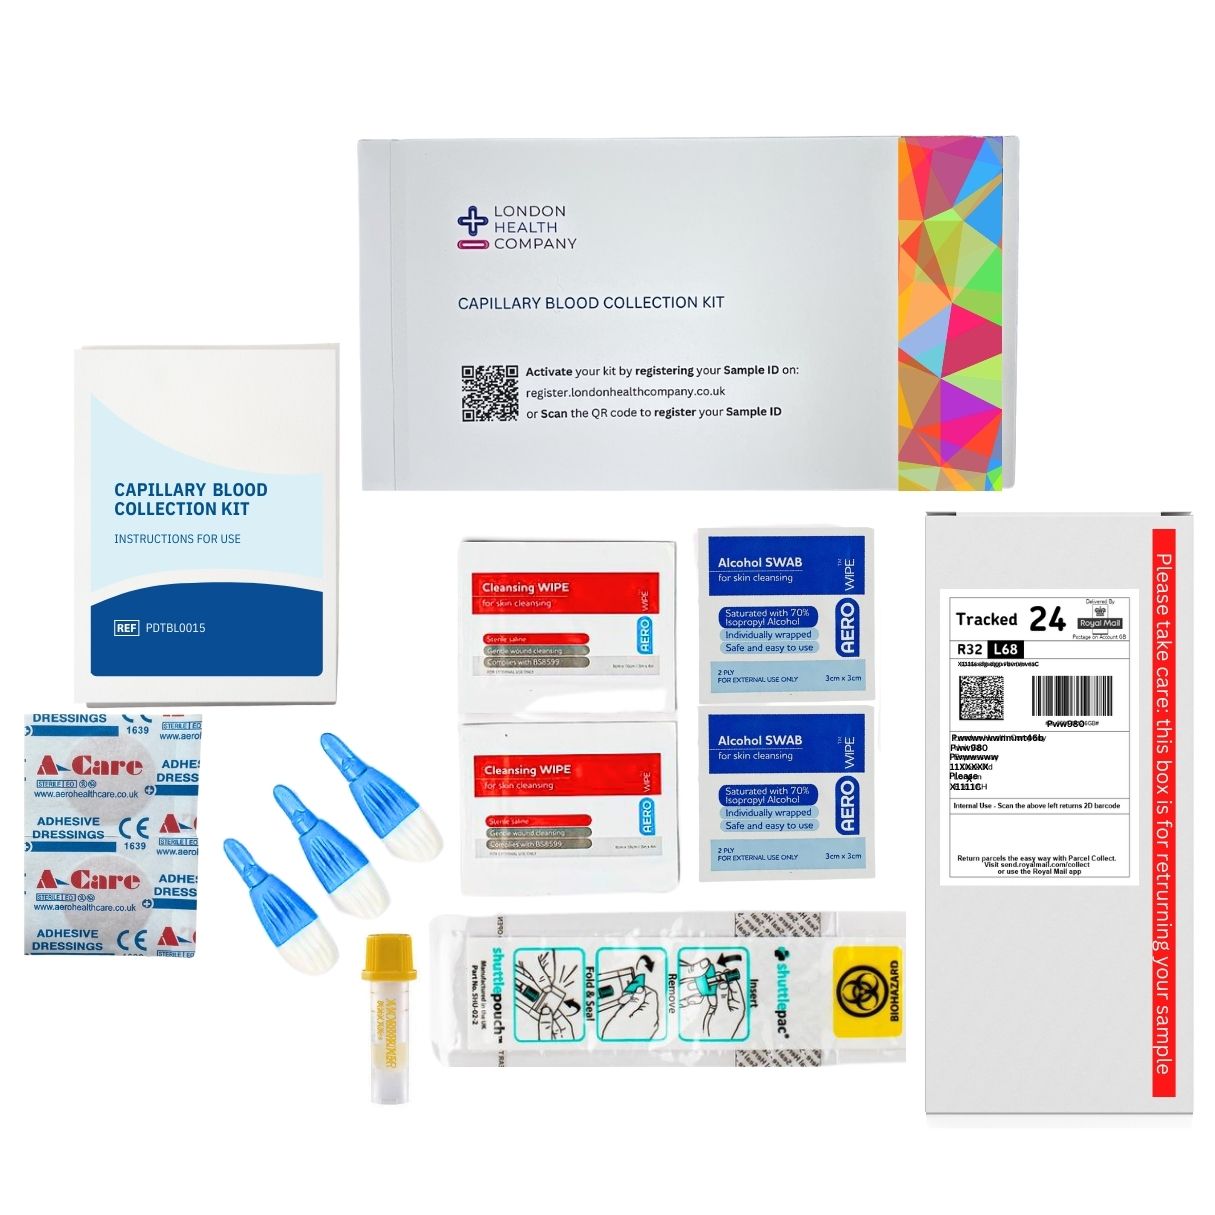 Capillary blood collection kit for liver testing